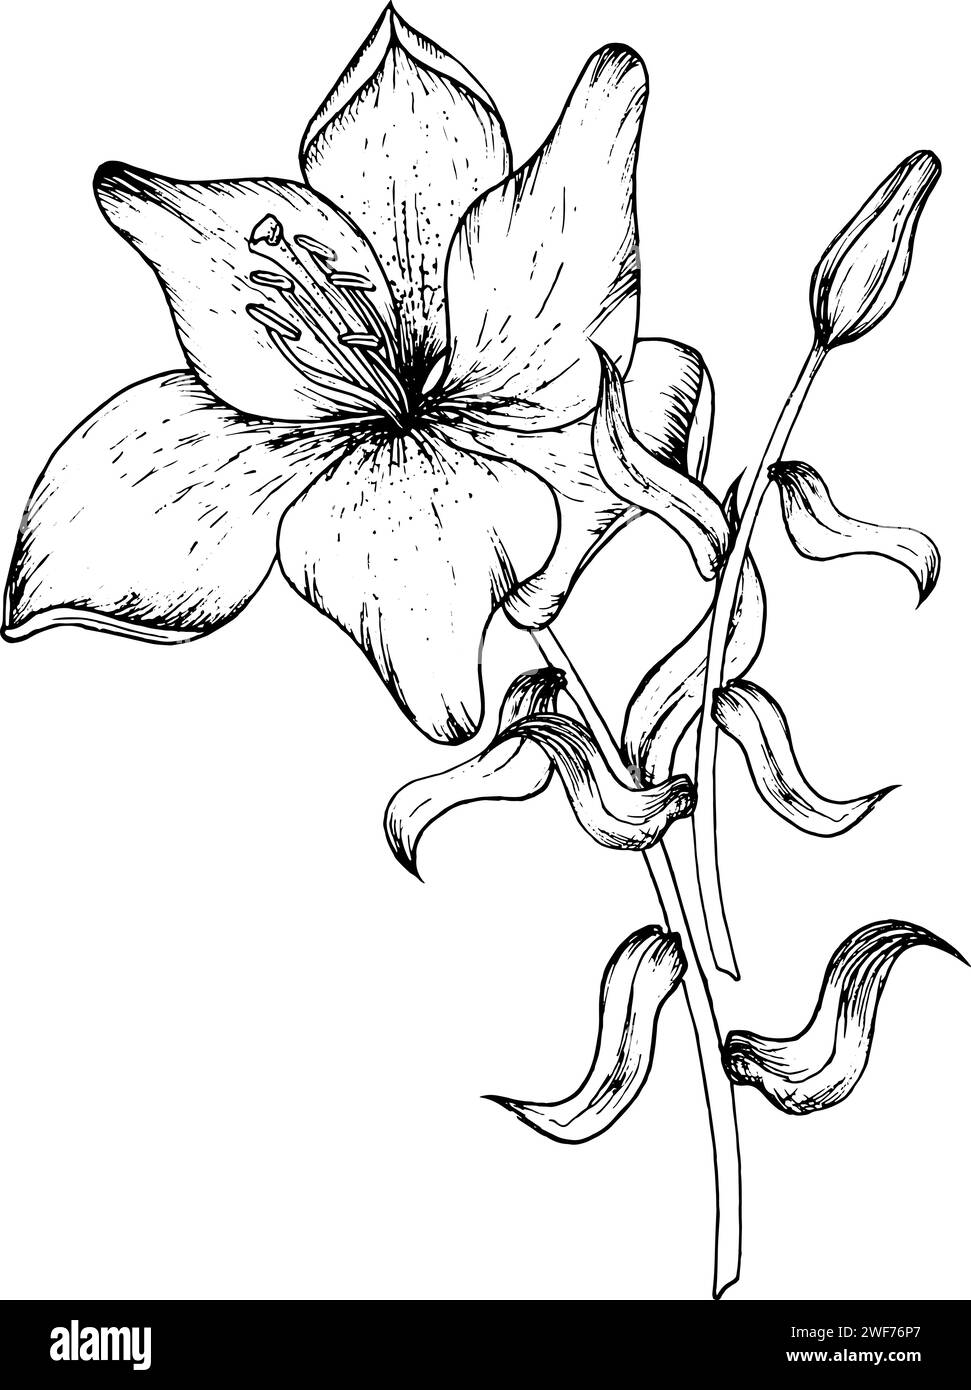 Graphic vector illustration of buds and petals of a lily. Black and ...